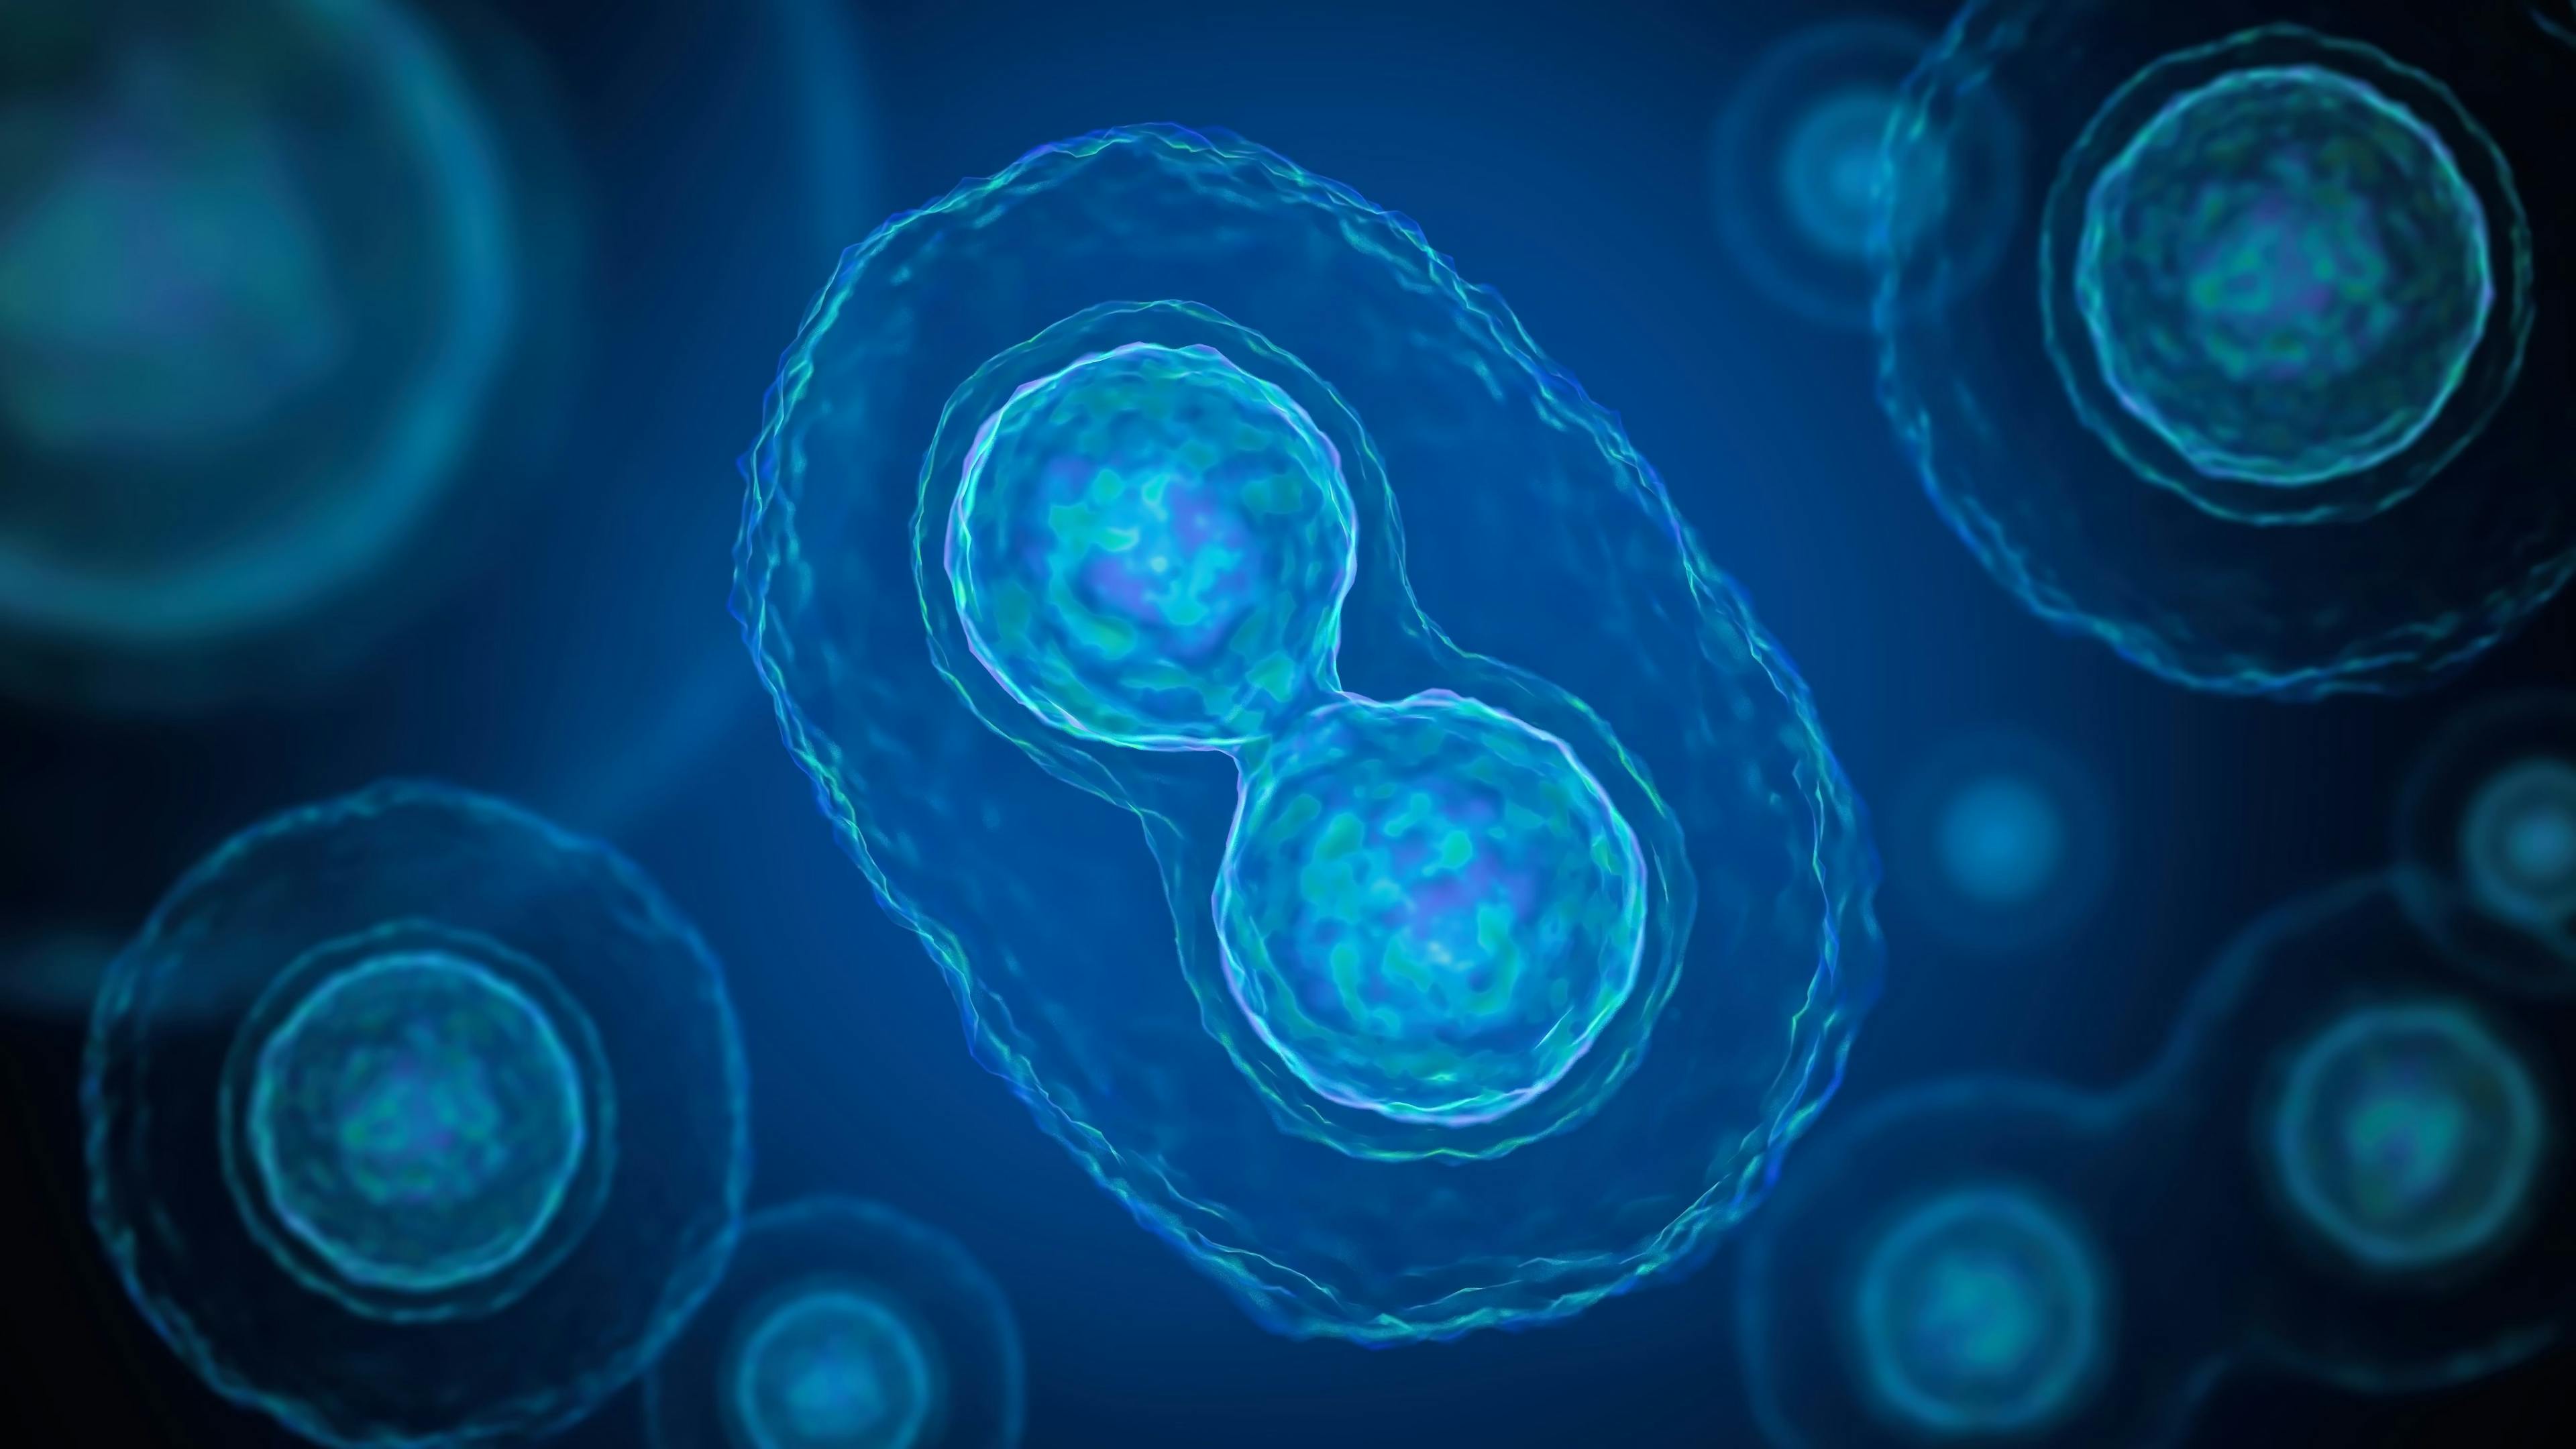 Mitosis - cell division of bacteria. 3D rendered illustration. | Image Credit: © vchalup - stock.adobe.com